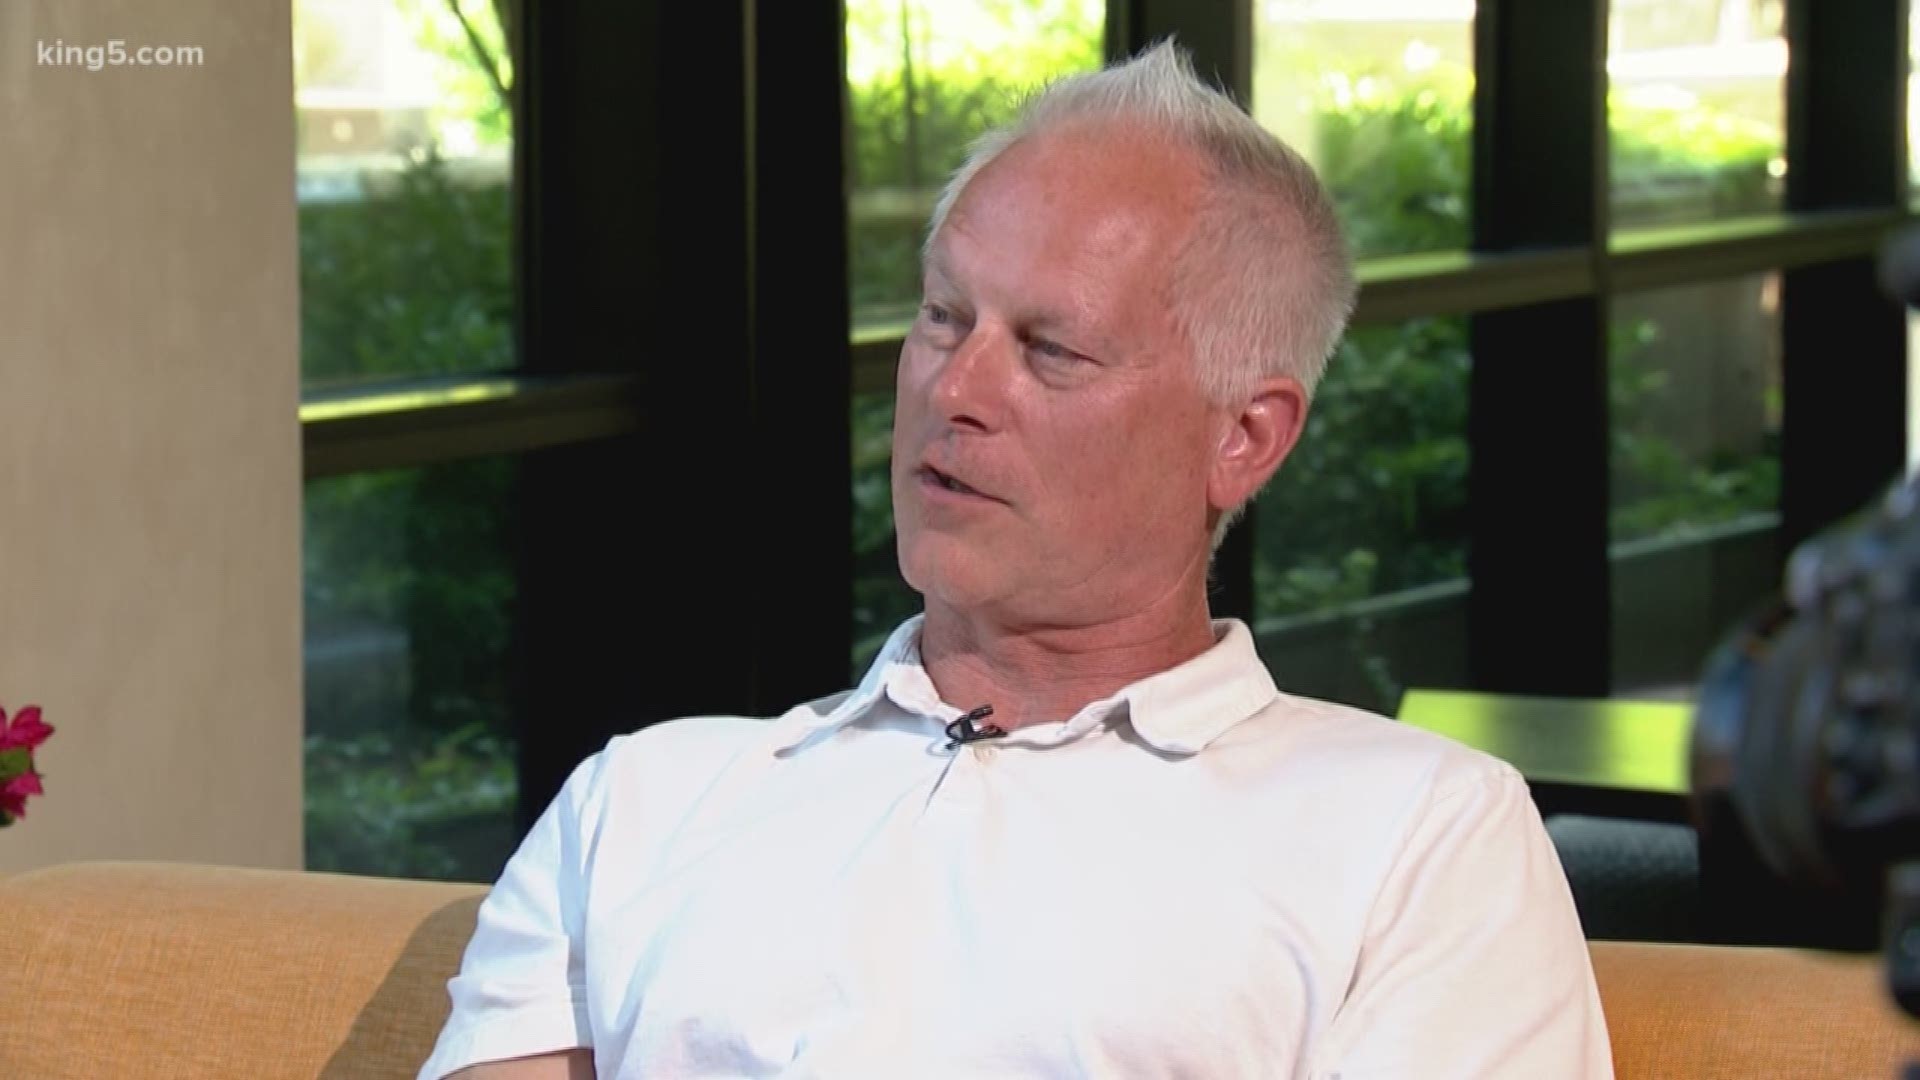 Kenny Mayne joined Take 5 to talk about runfreely.org